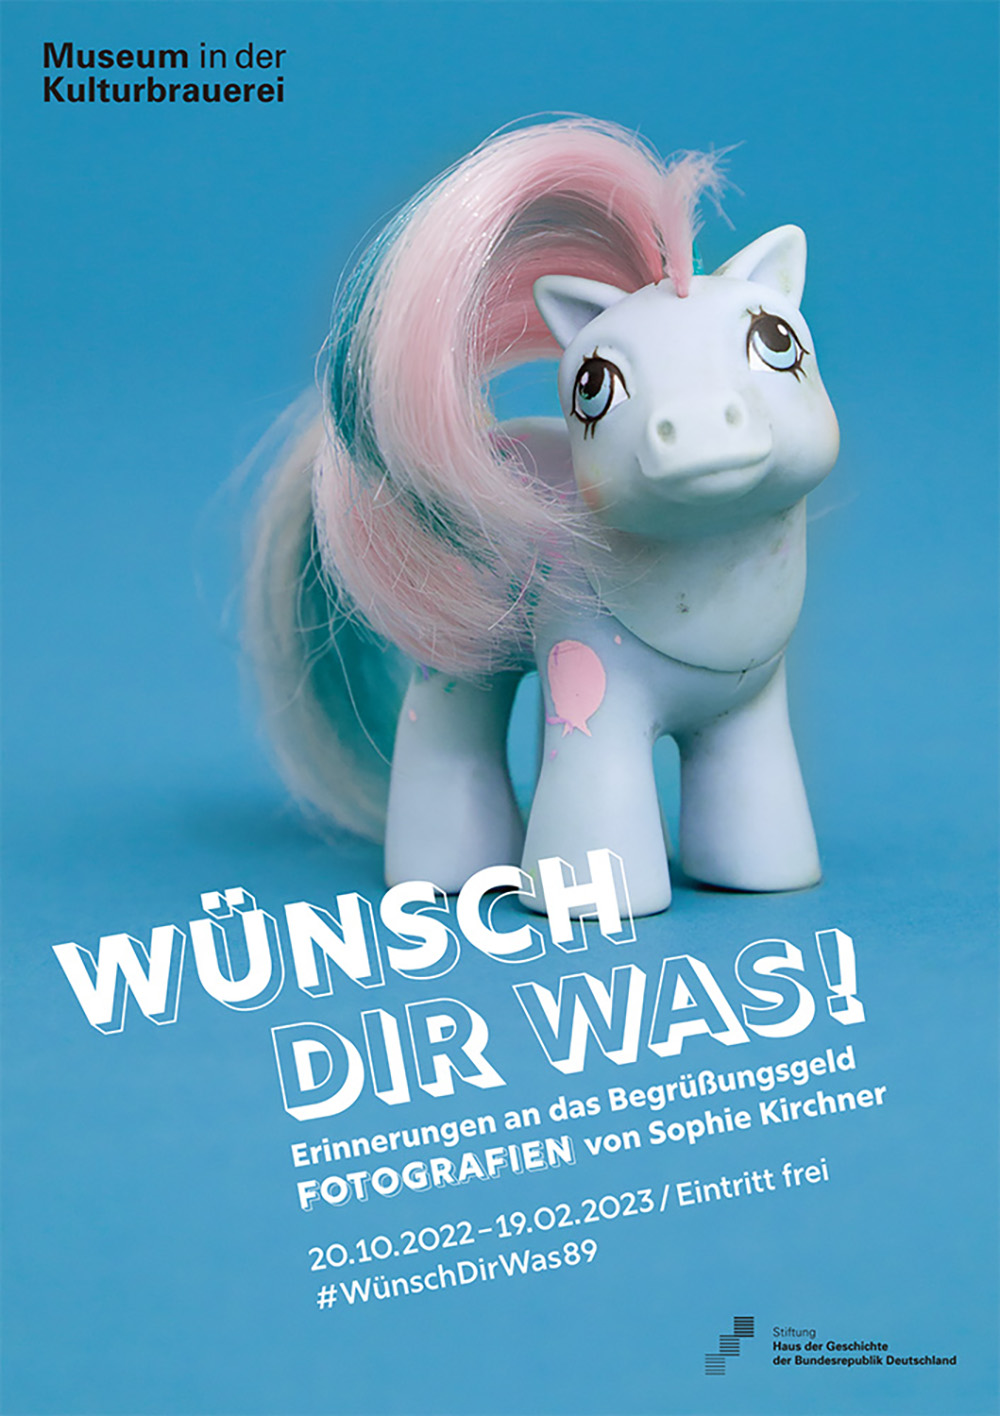 Poster: Make a wish! Memories of the welcome money with photographs by Sophie Kirchner. White toy horse with pink-light blue mane on a blue background.